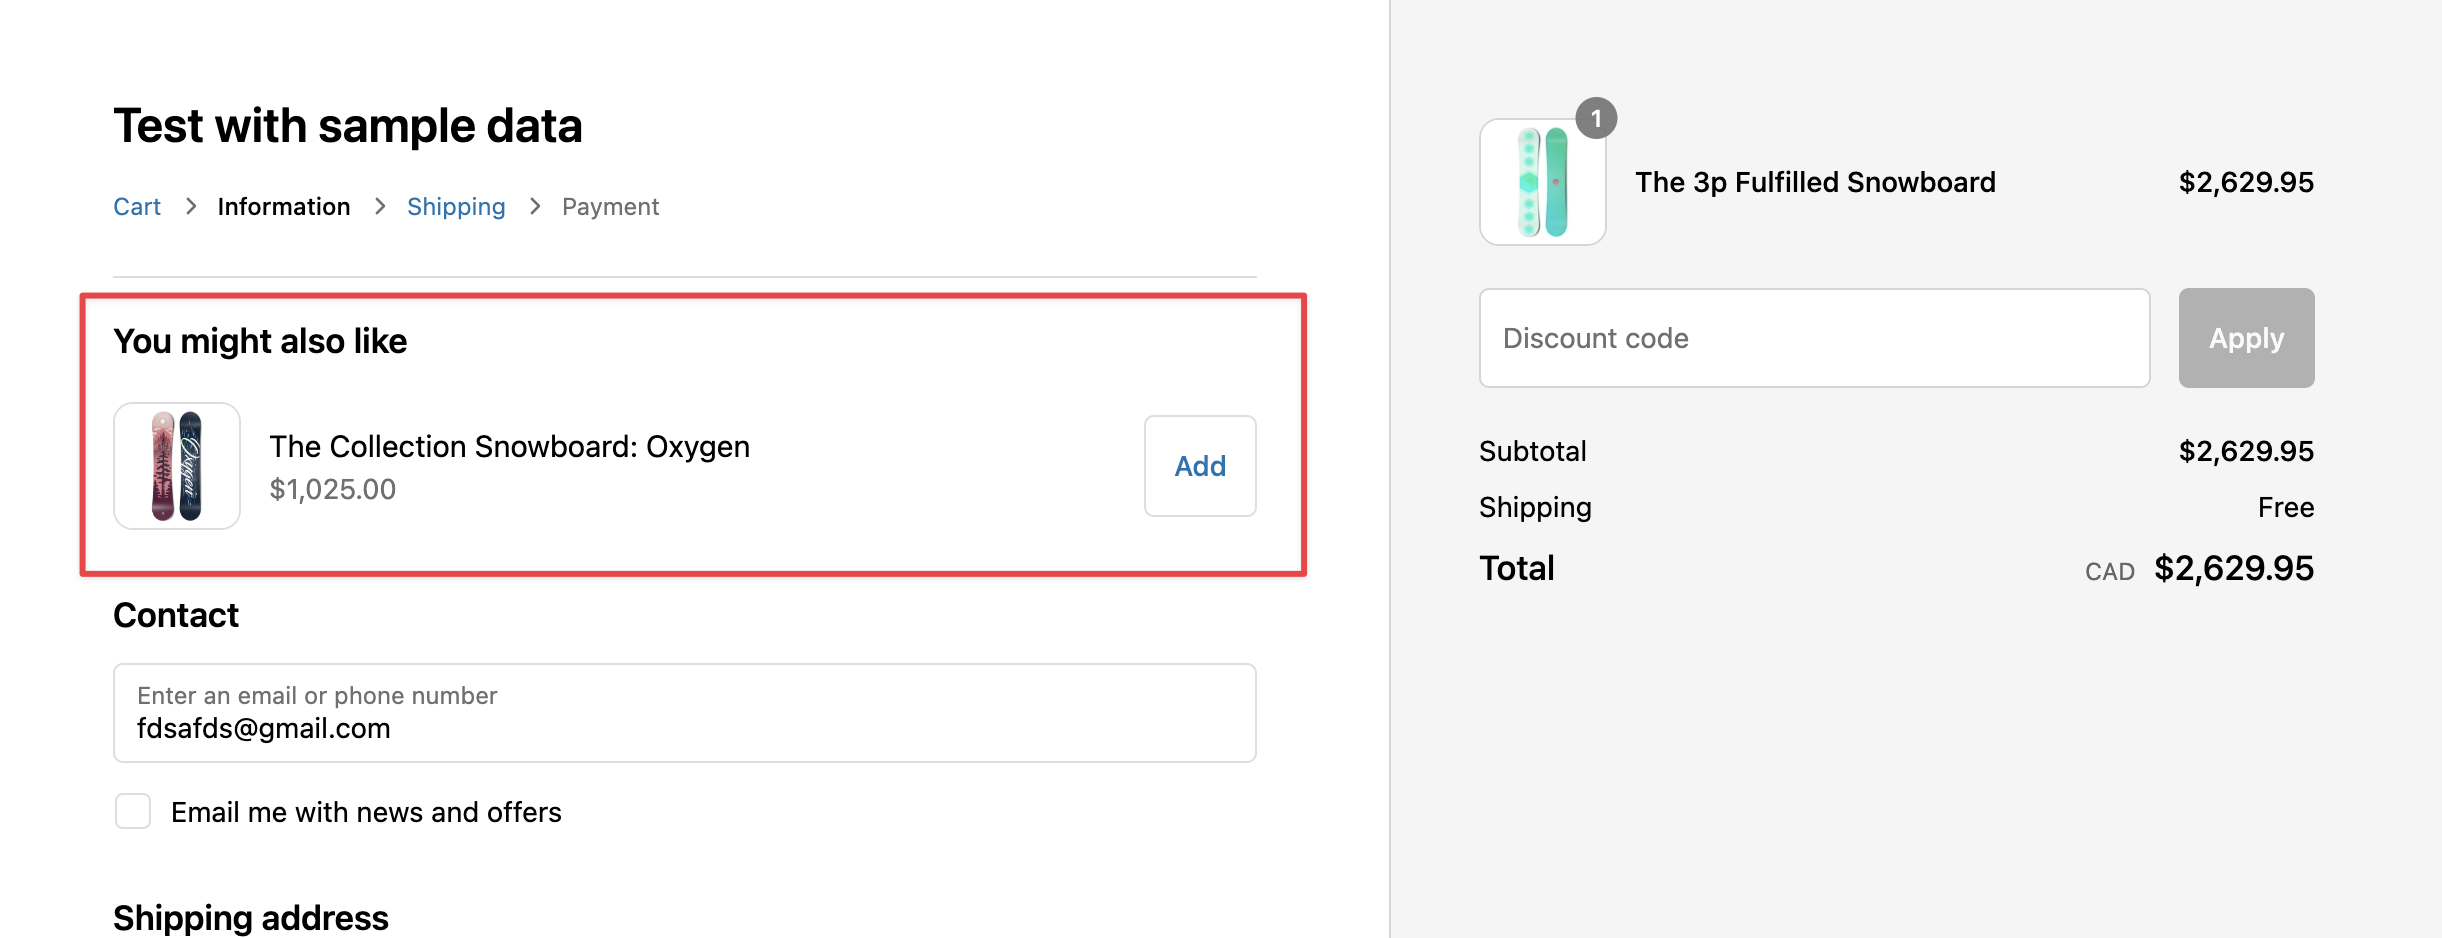 A screenshot of the pre-purchase app built in this tutorial using Shopify checkout UI extensions